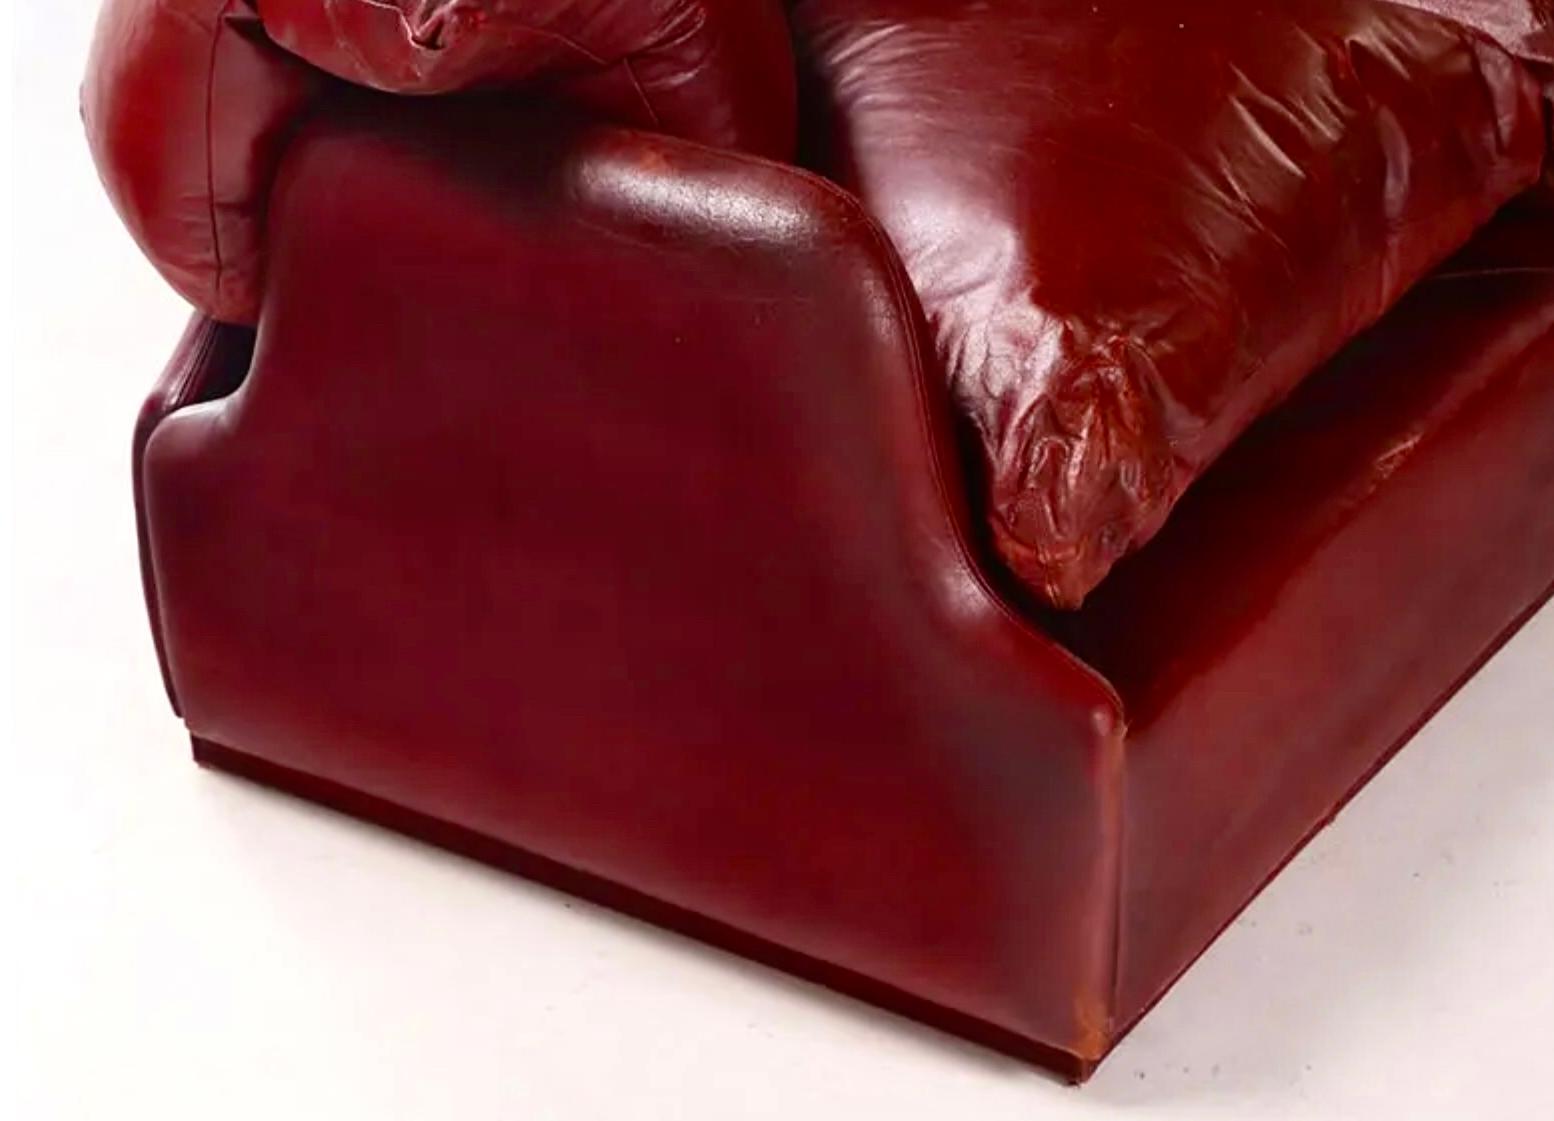 Confidential 2-seat sofa, Cordovan Leather, Alberto Rosselli for Saporiti Italy, 1972.

Original leather appears to have the shine, feel and variation in deep oxblood color that is typical of cordovan. Leather upholstered sofa with loose cushions